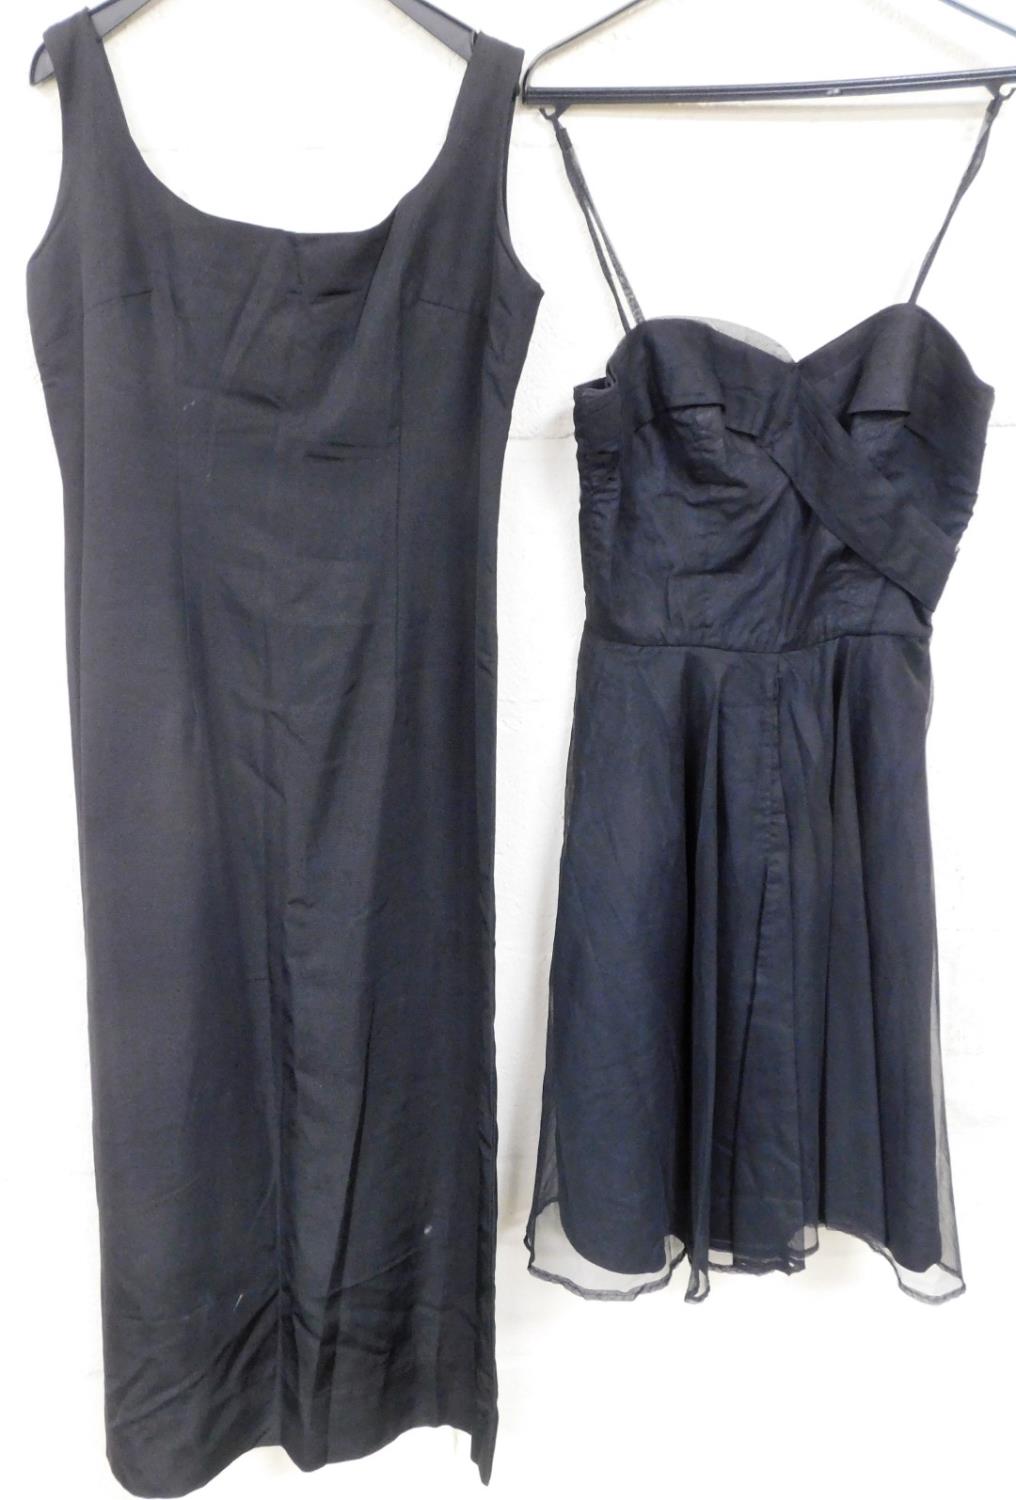 A vintage ladies evening dress in black, and another.